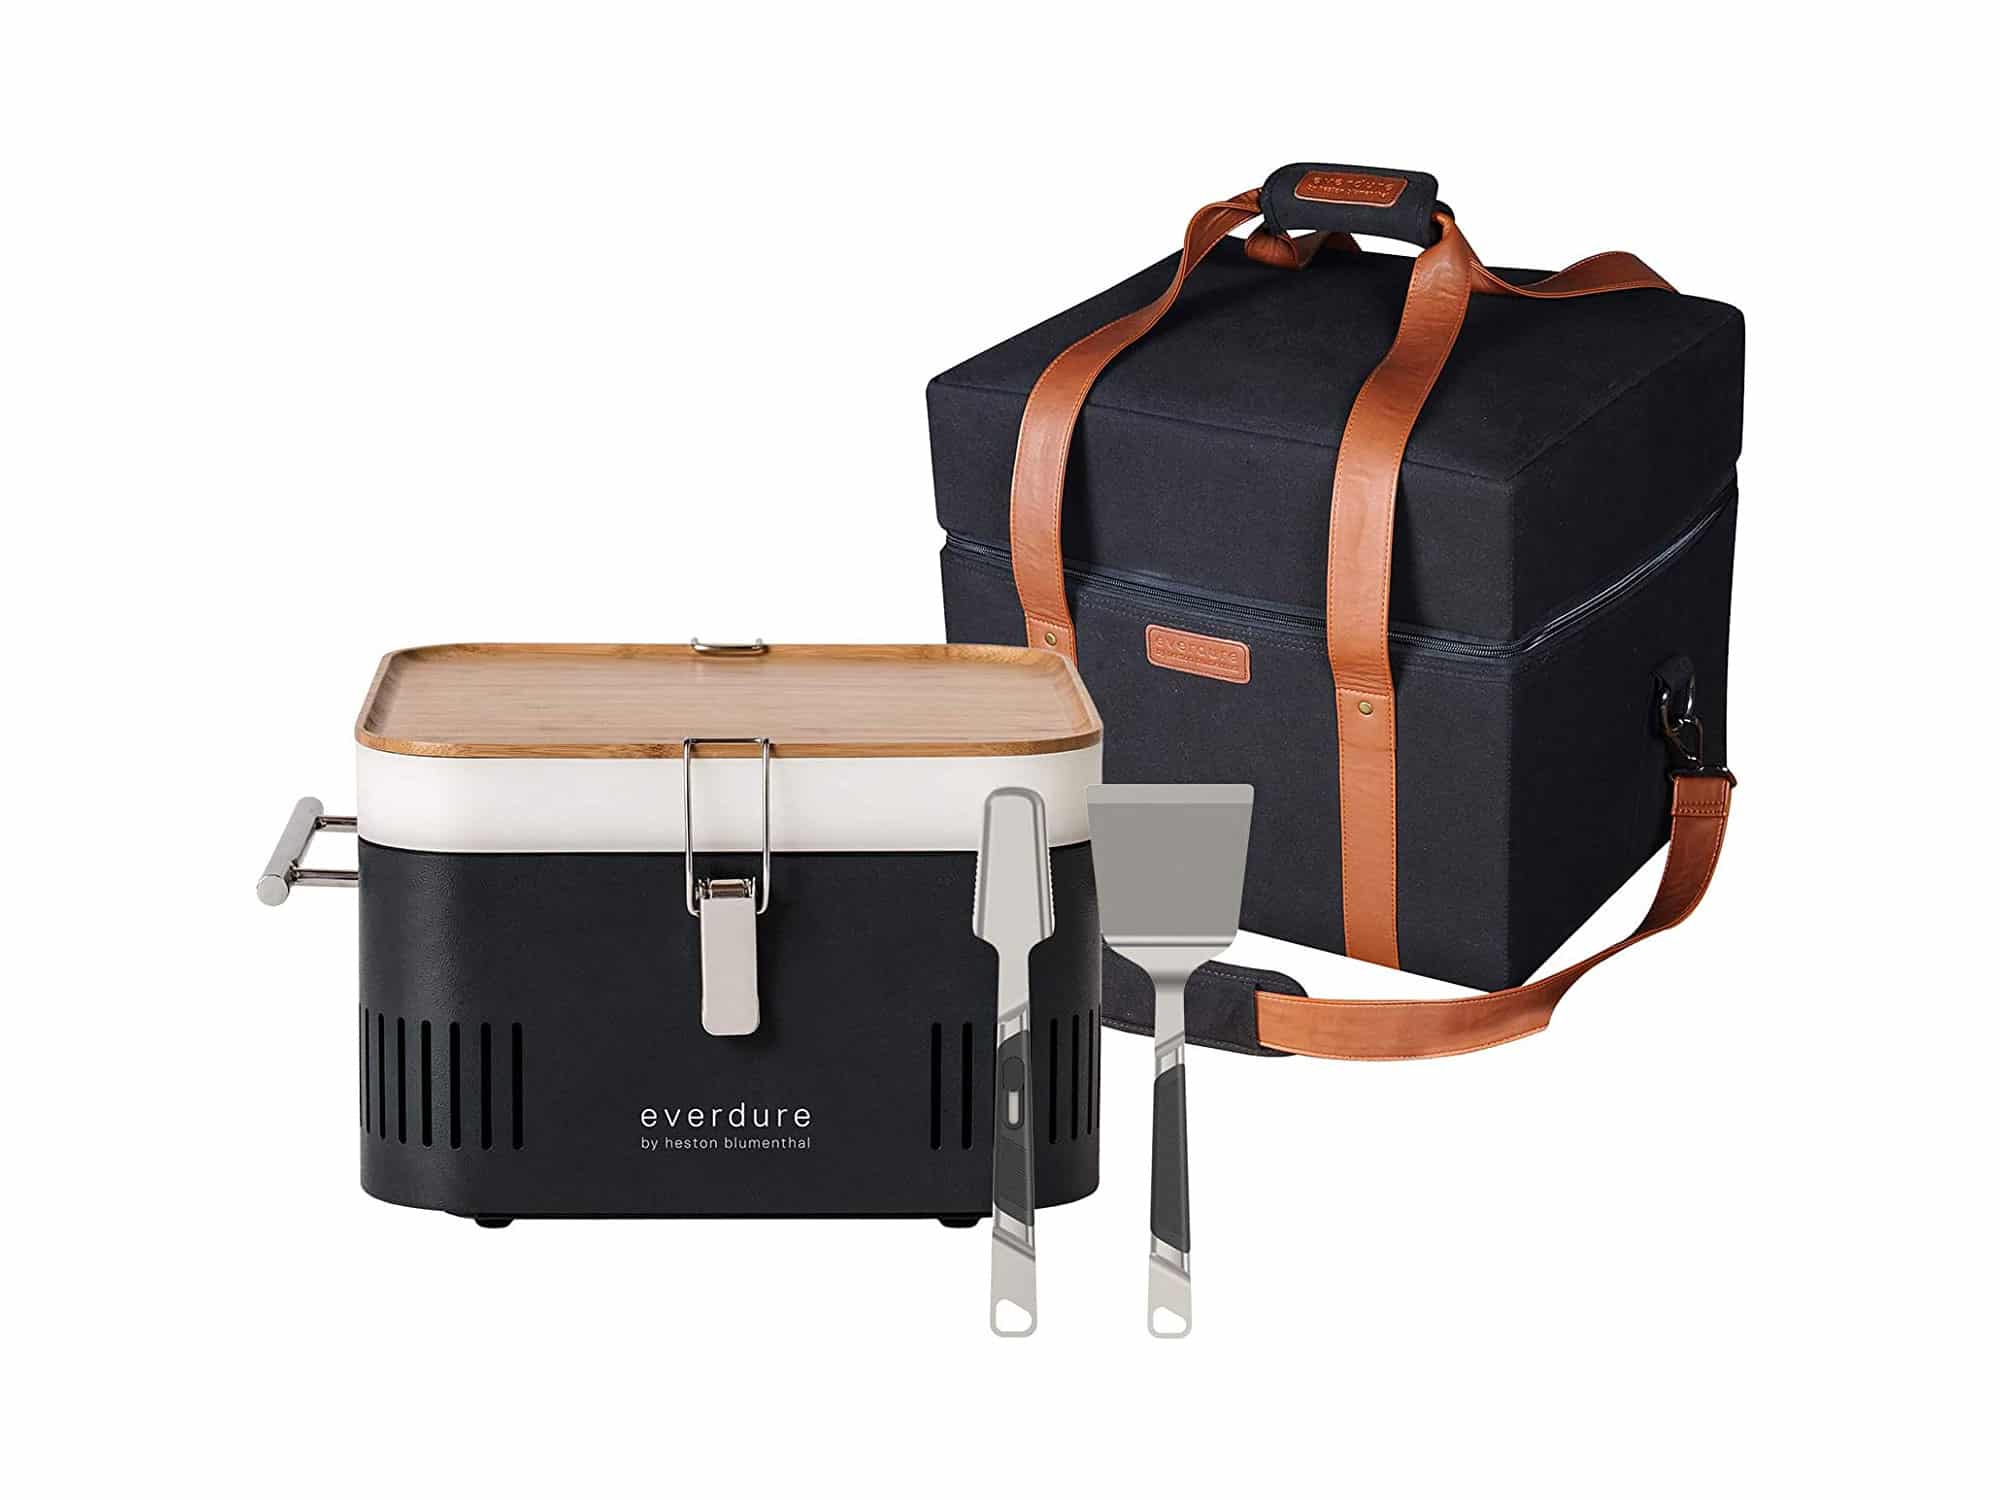 Everdure by Heston Blumenthal Cube Portable Charcoal Grill with Travel Bag